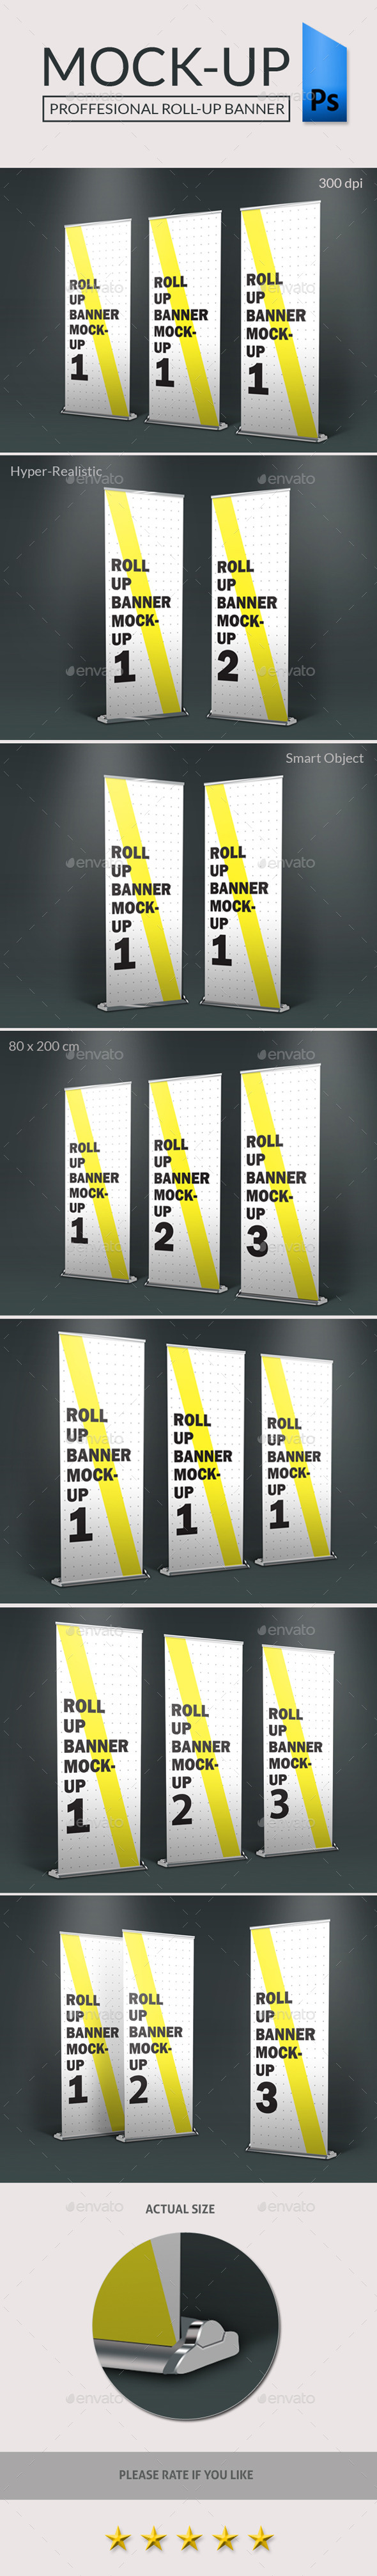 Free Roll-Up Banner Mockup 80 x 200 (PSD)